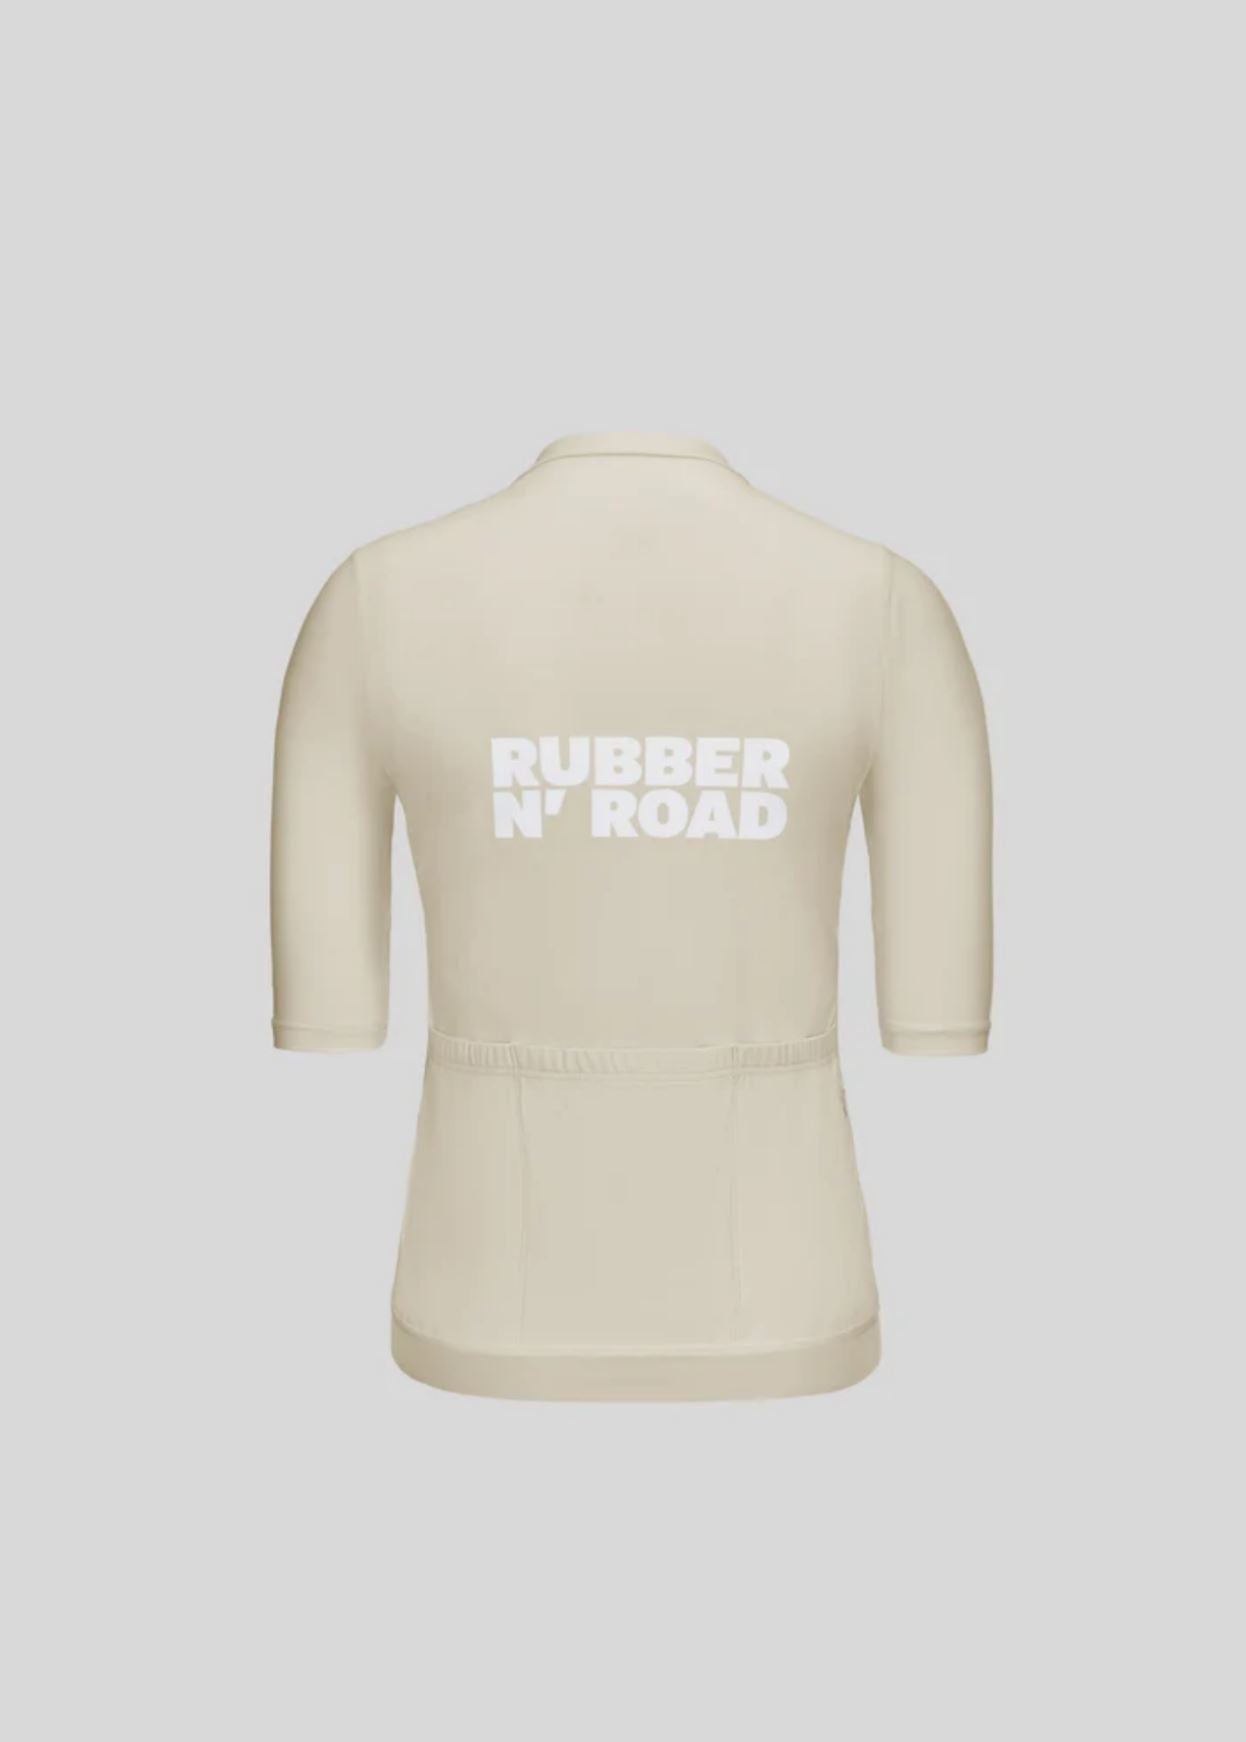 Rubber N' Road - Maillot Uniform Femme Maillots Rubber N' Road 